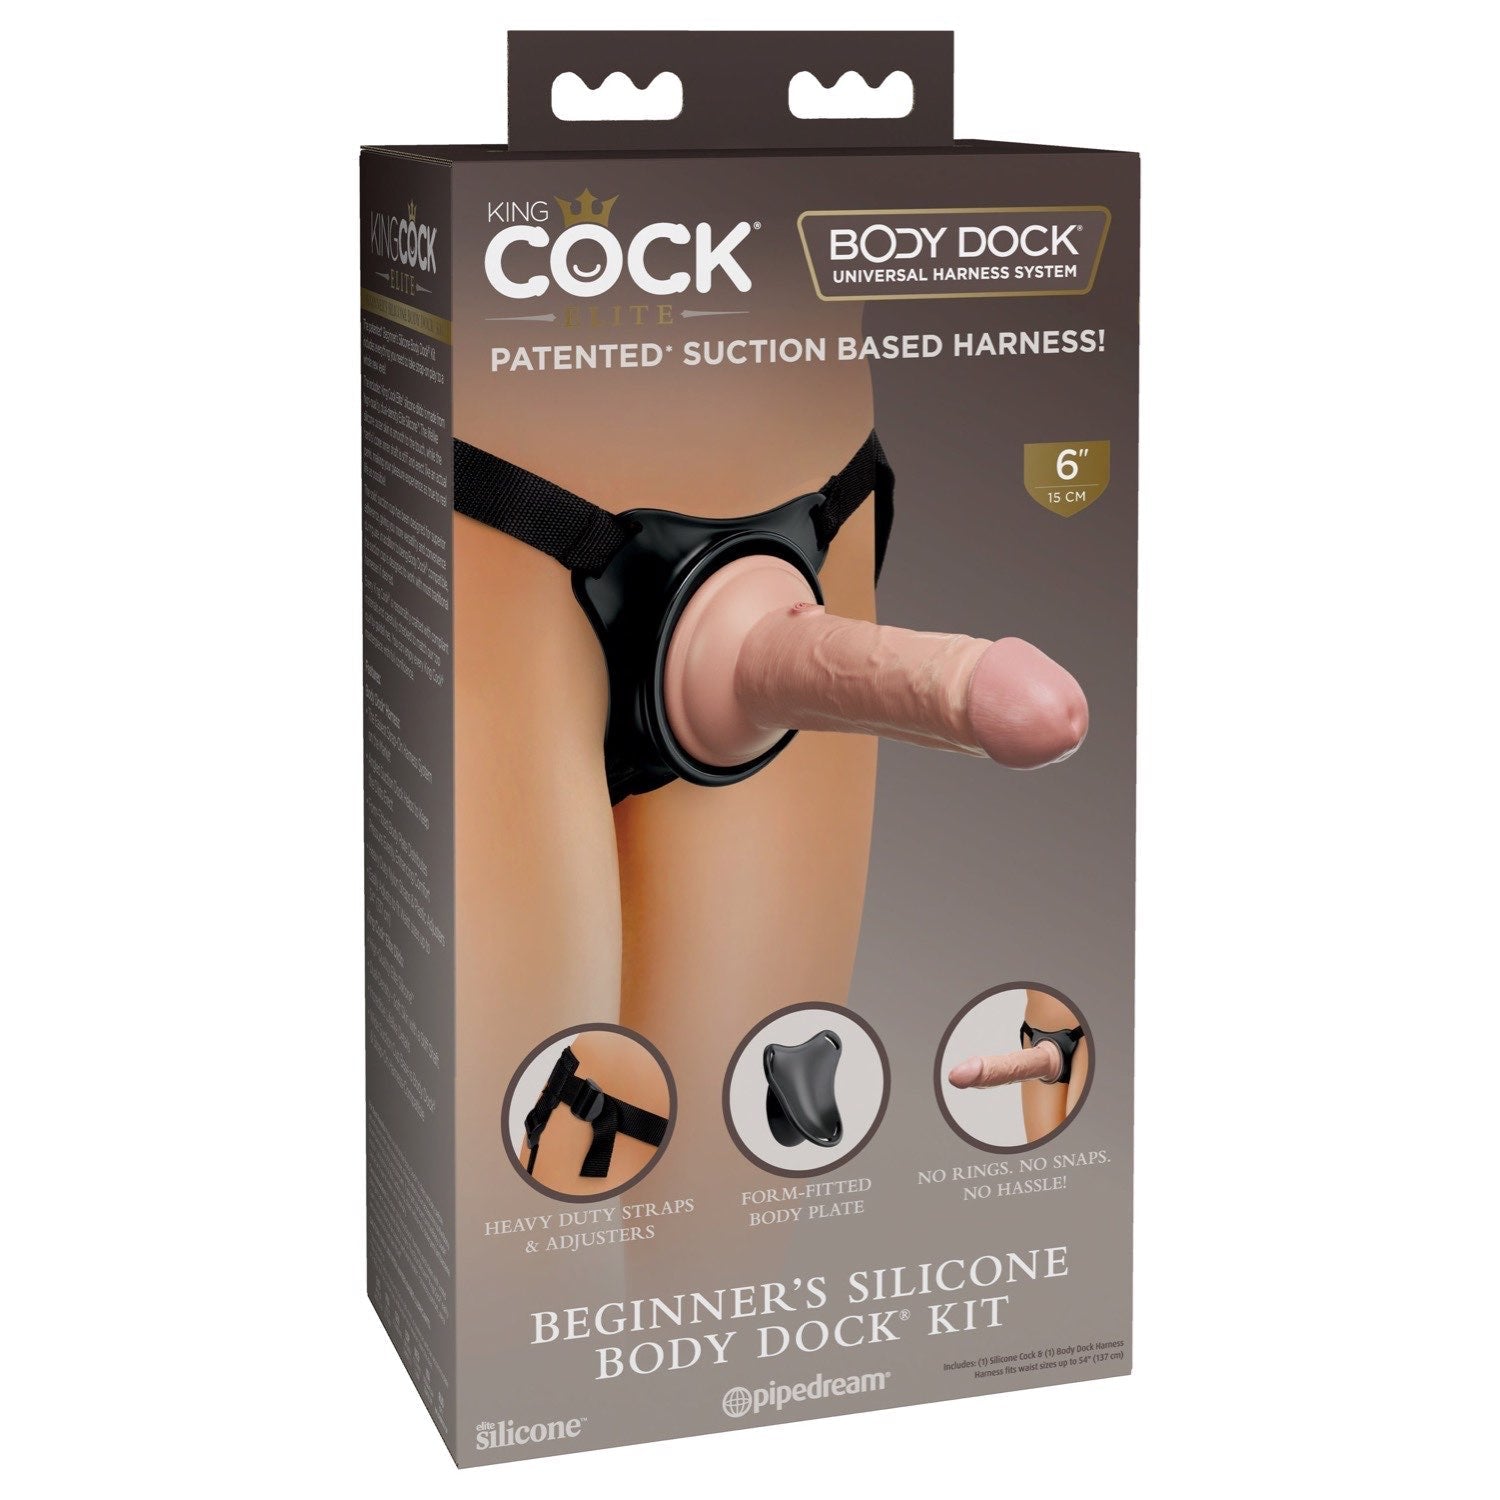 King Cock Elite Beginner&#39;s Silicone Body Dock Kit - Body Dock Strap-On Harness with 15.2 cm Dong by Pipedream